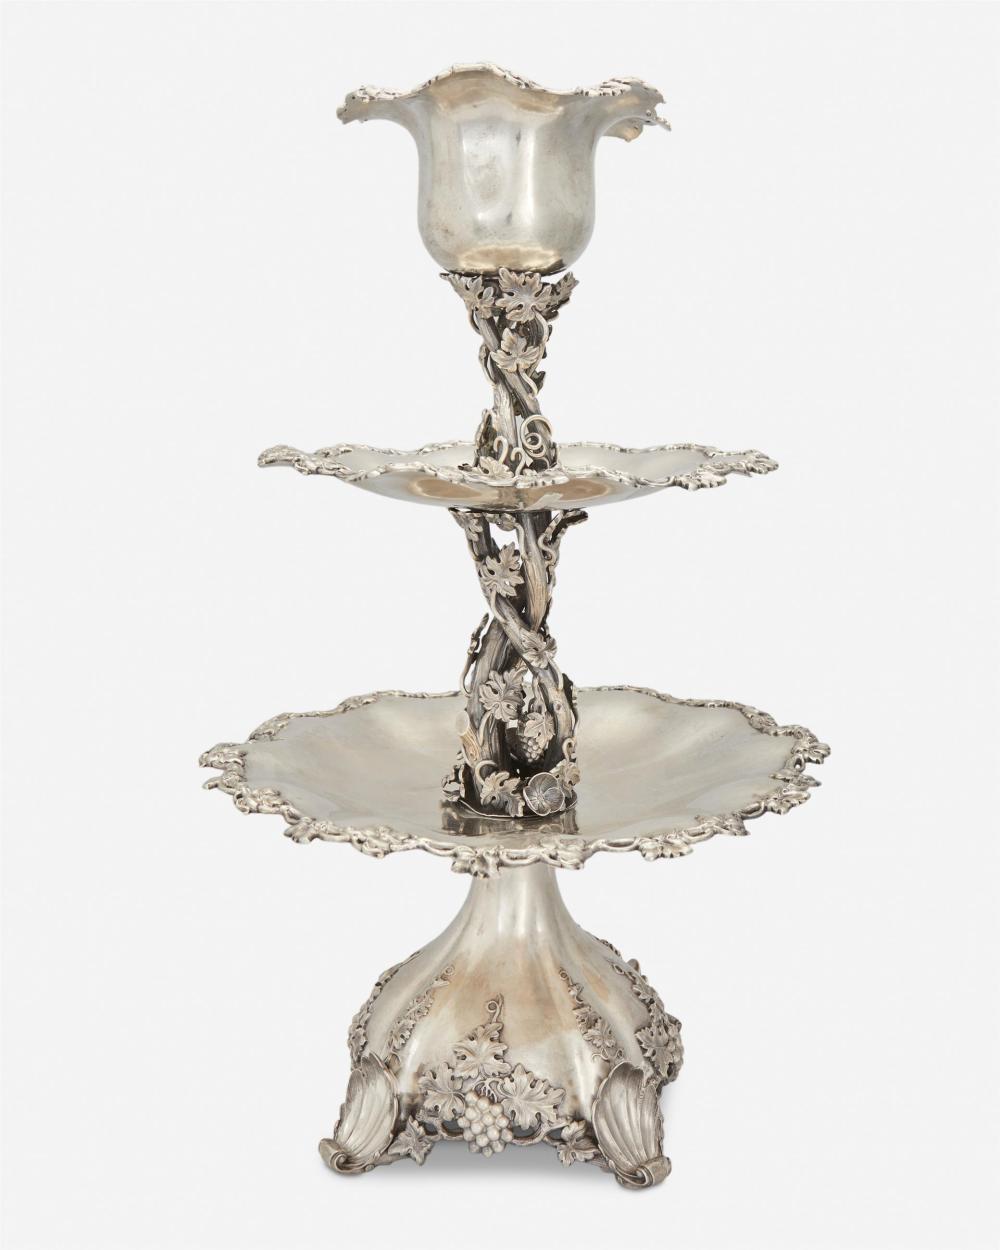 A SWEDISH SILVER CENTERPIECE BY